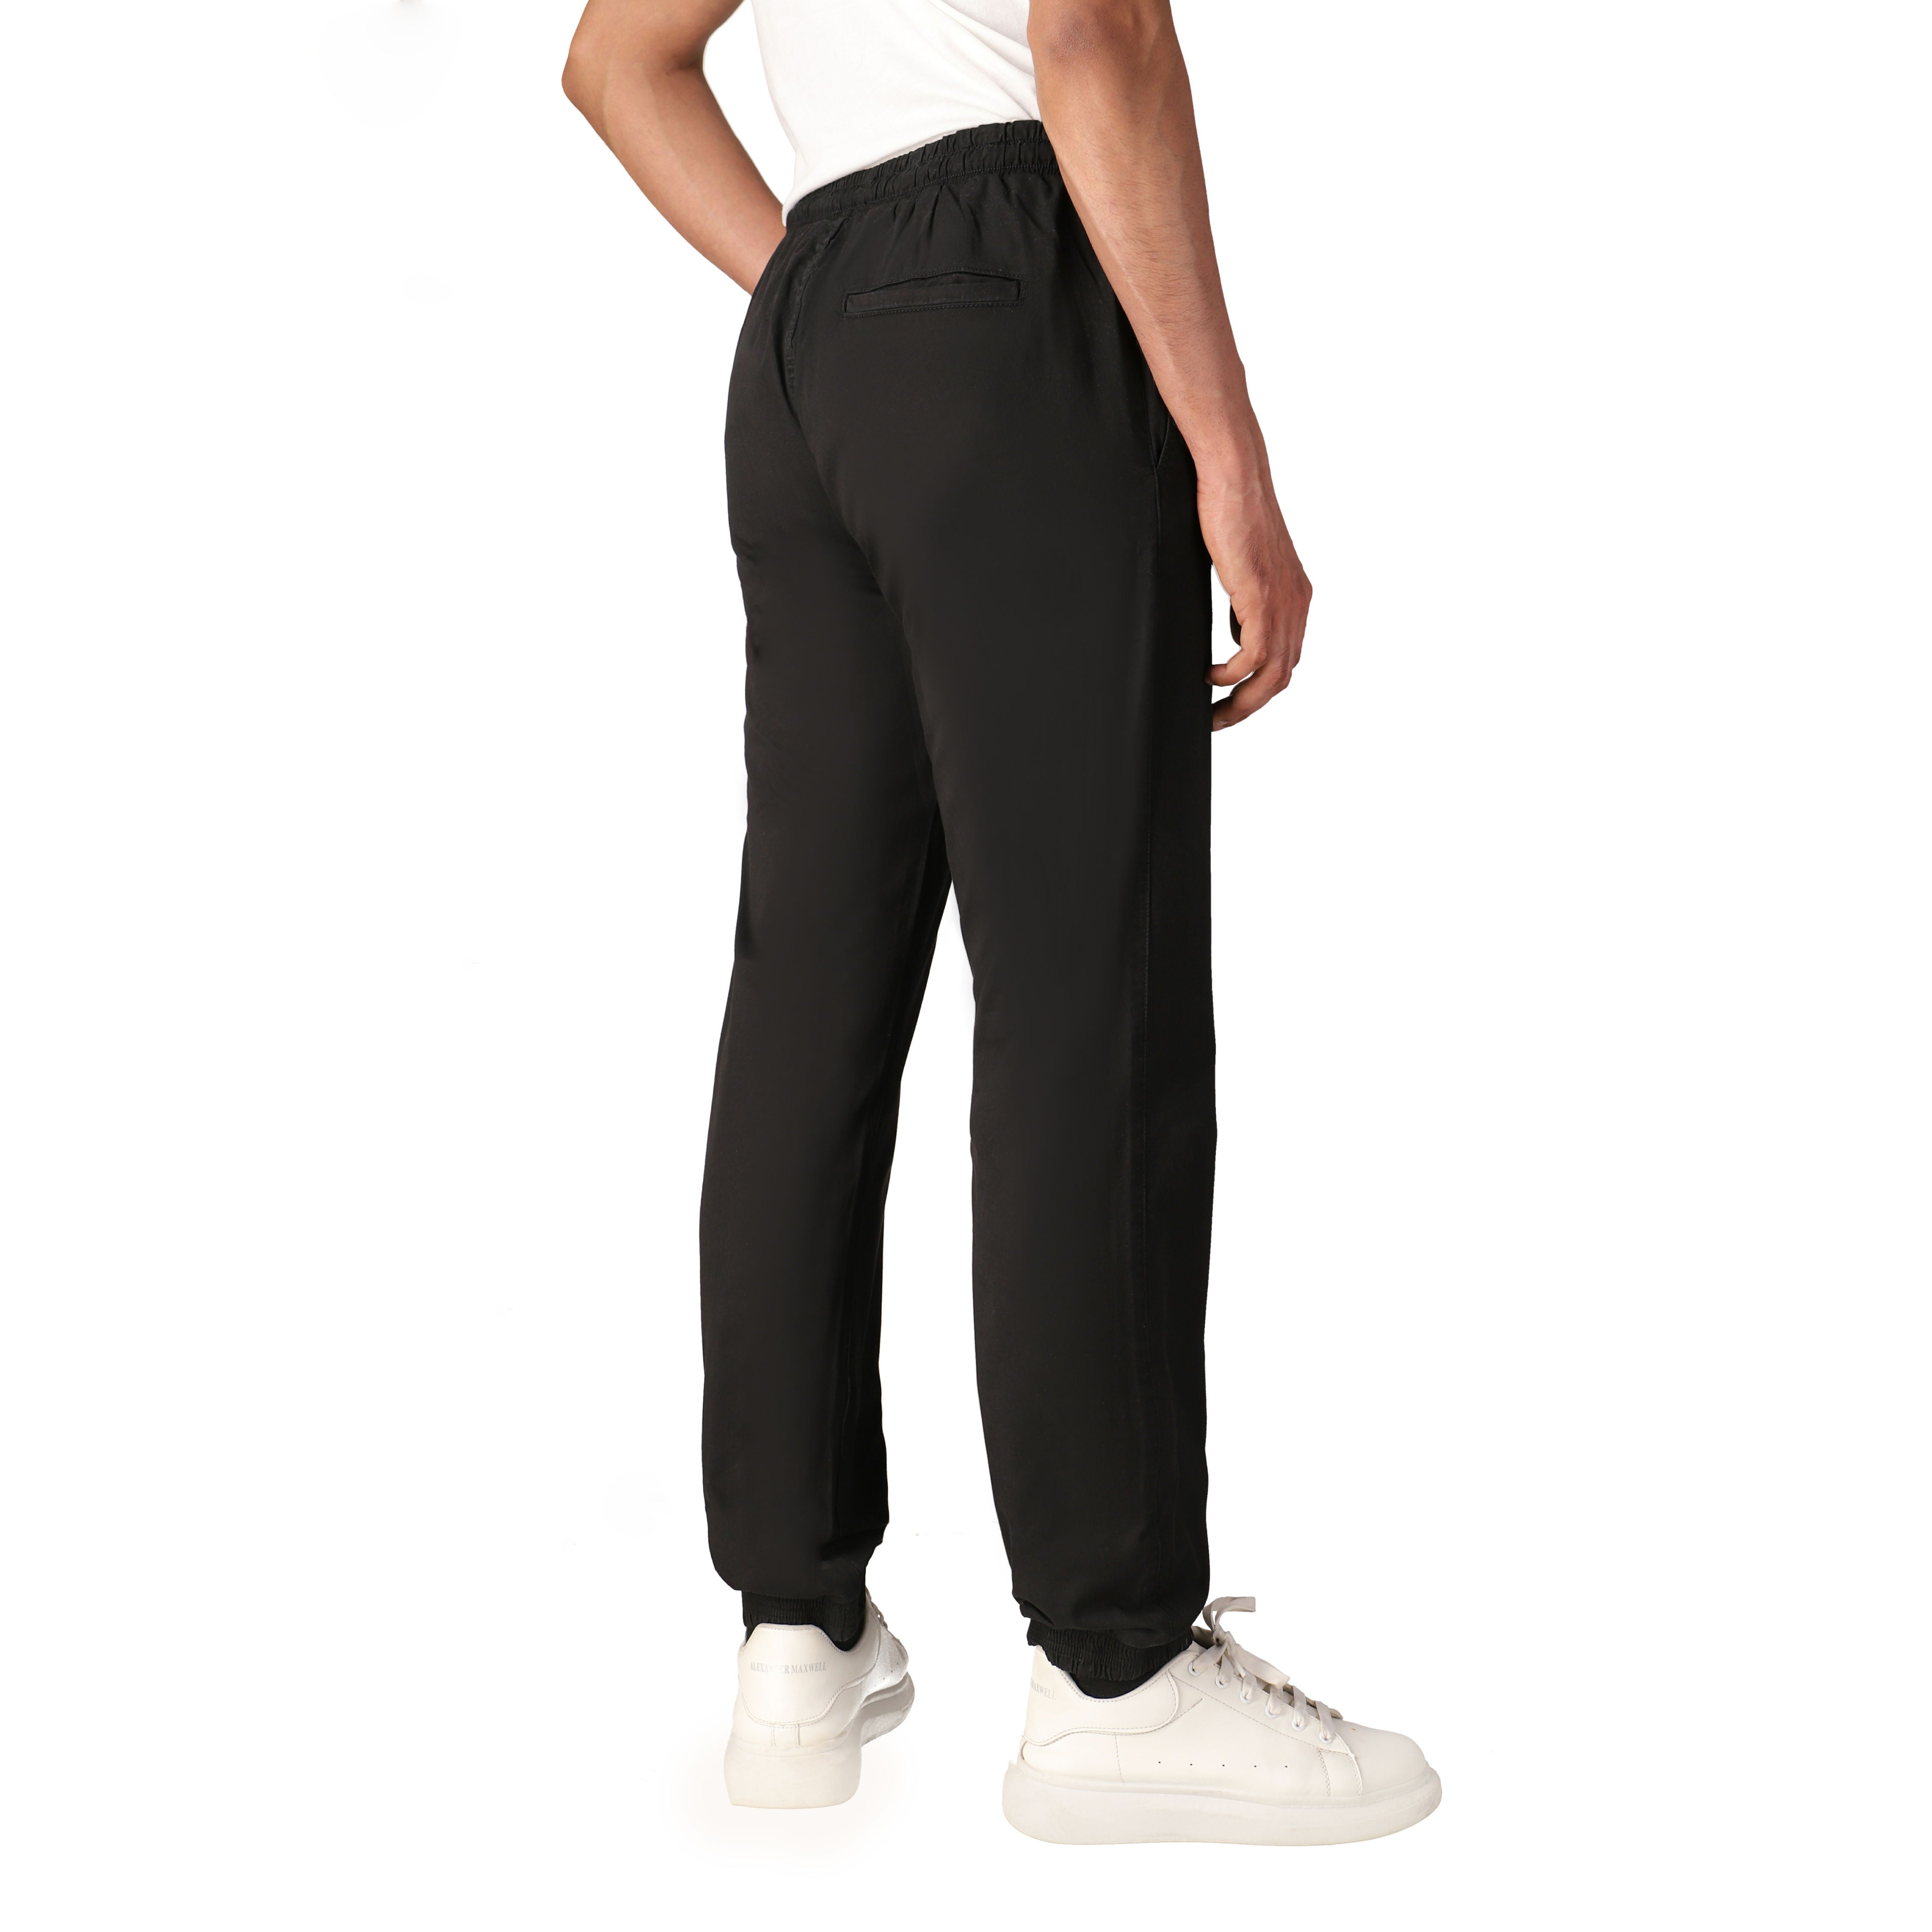 INC International Concepts Utility Jogger Pants, Created for